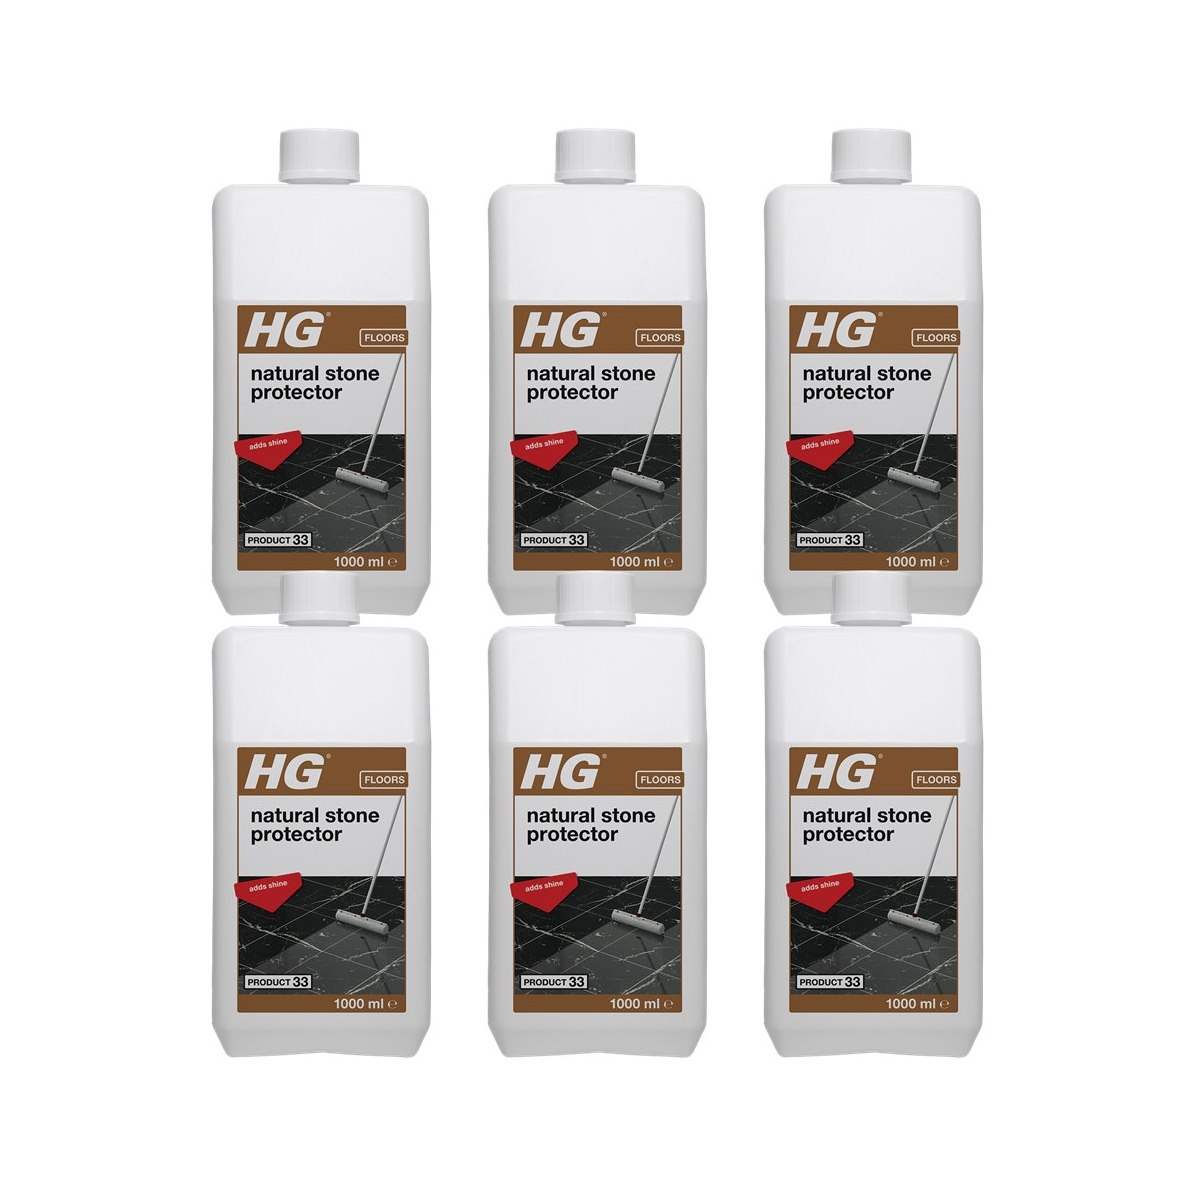 Case of 6 x HG Natural Stone Protector 1 Litre Product 33